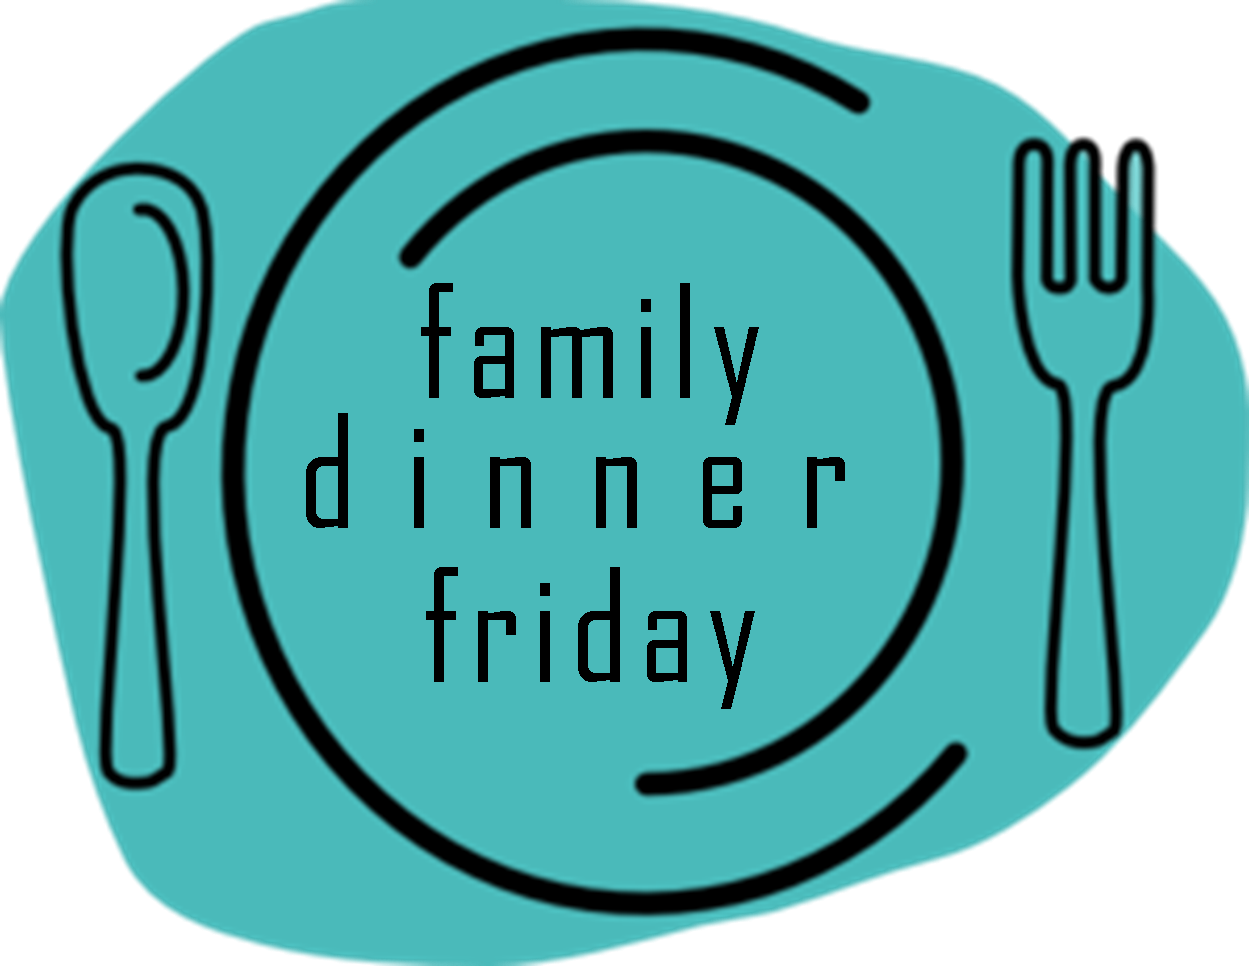 Family Dinner Friday - Plate Fork And Knife Clipart (1249x966)